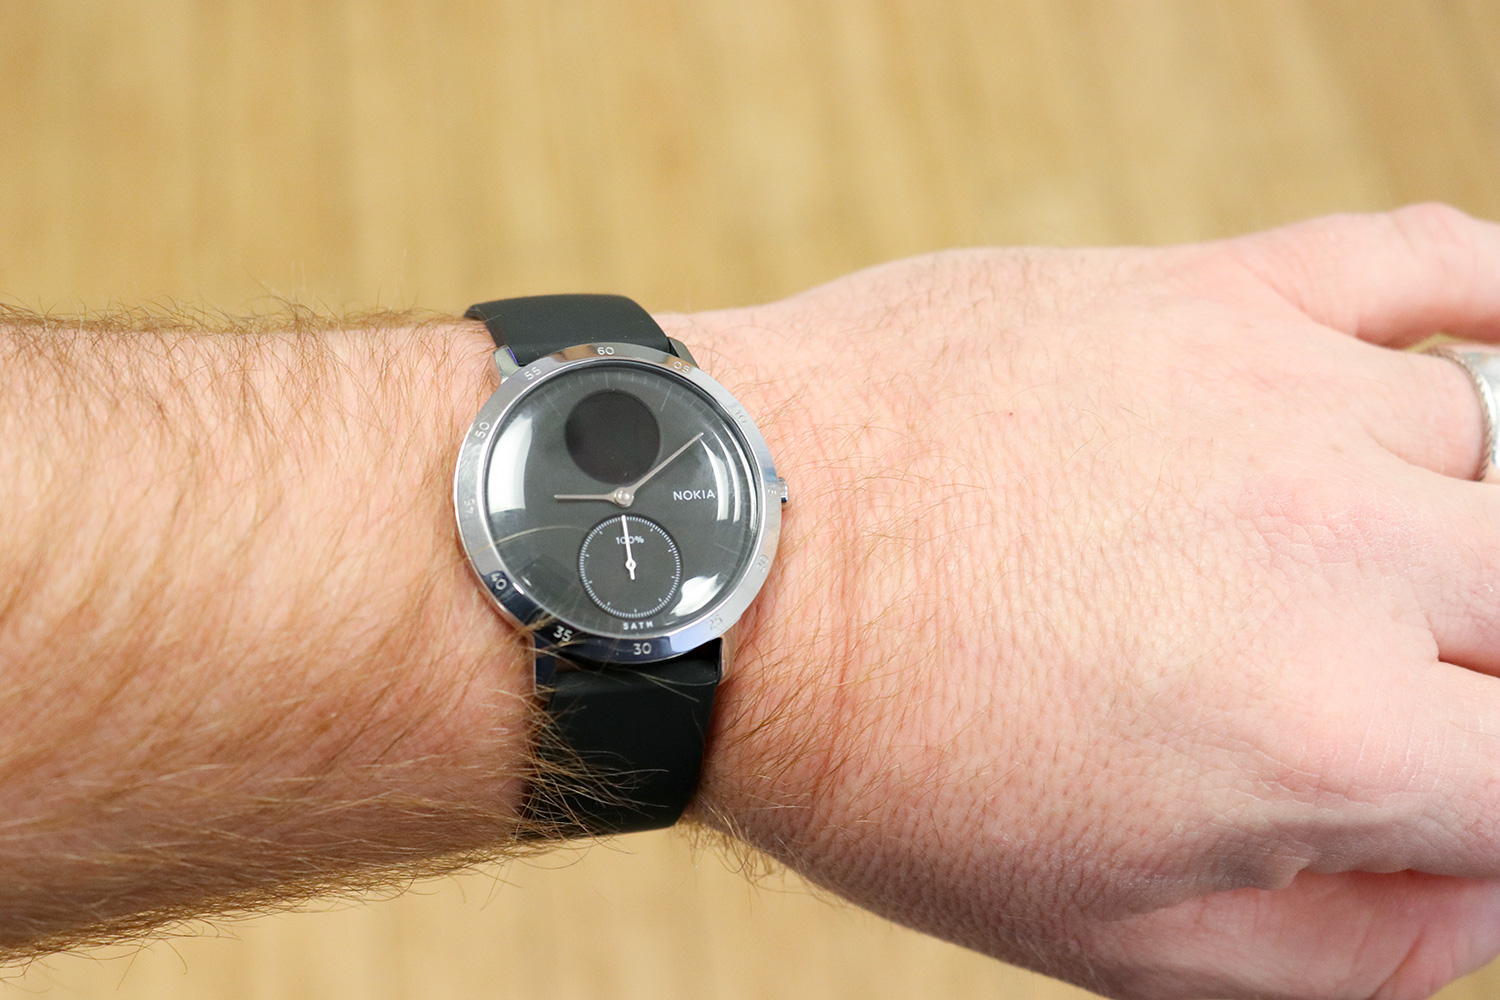 The Nokia Steel HR blends sleek design with superb fitness-tracking capabilities